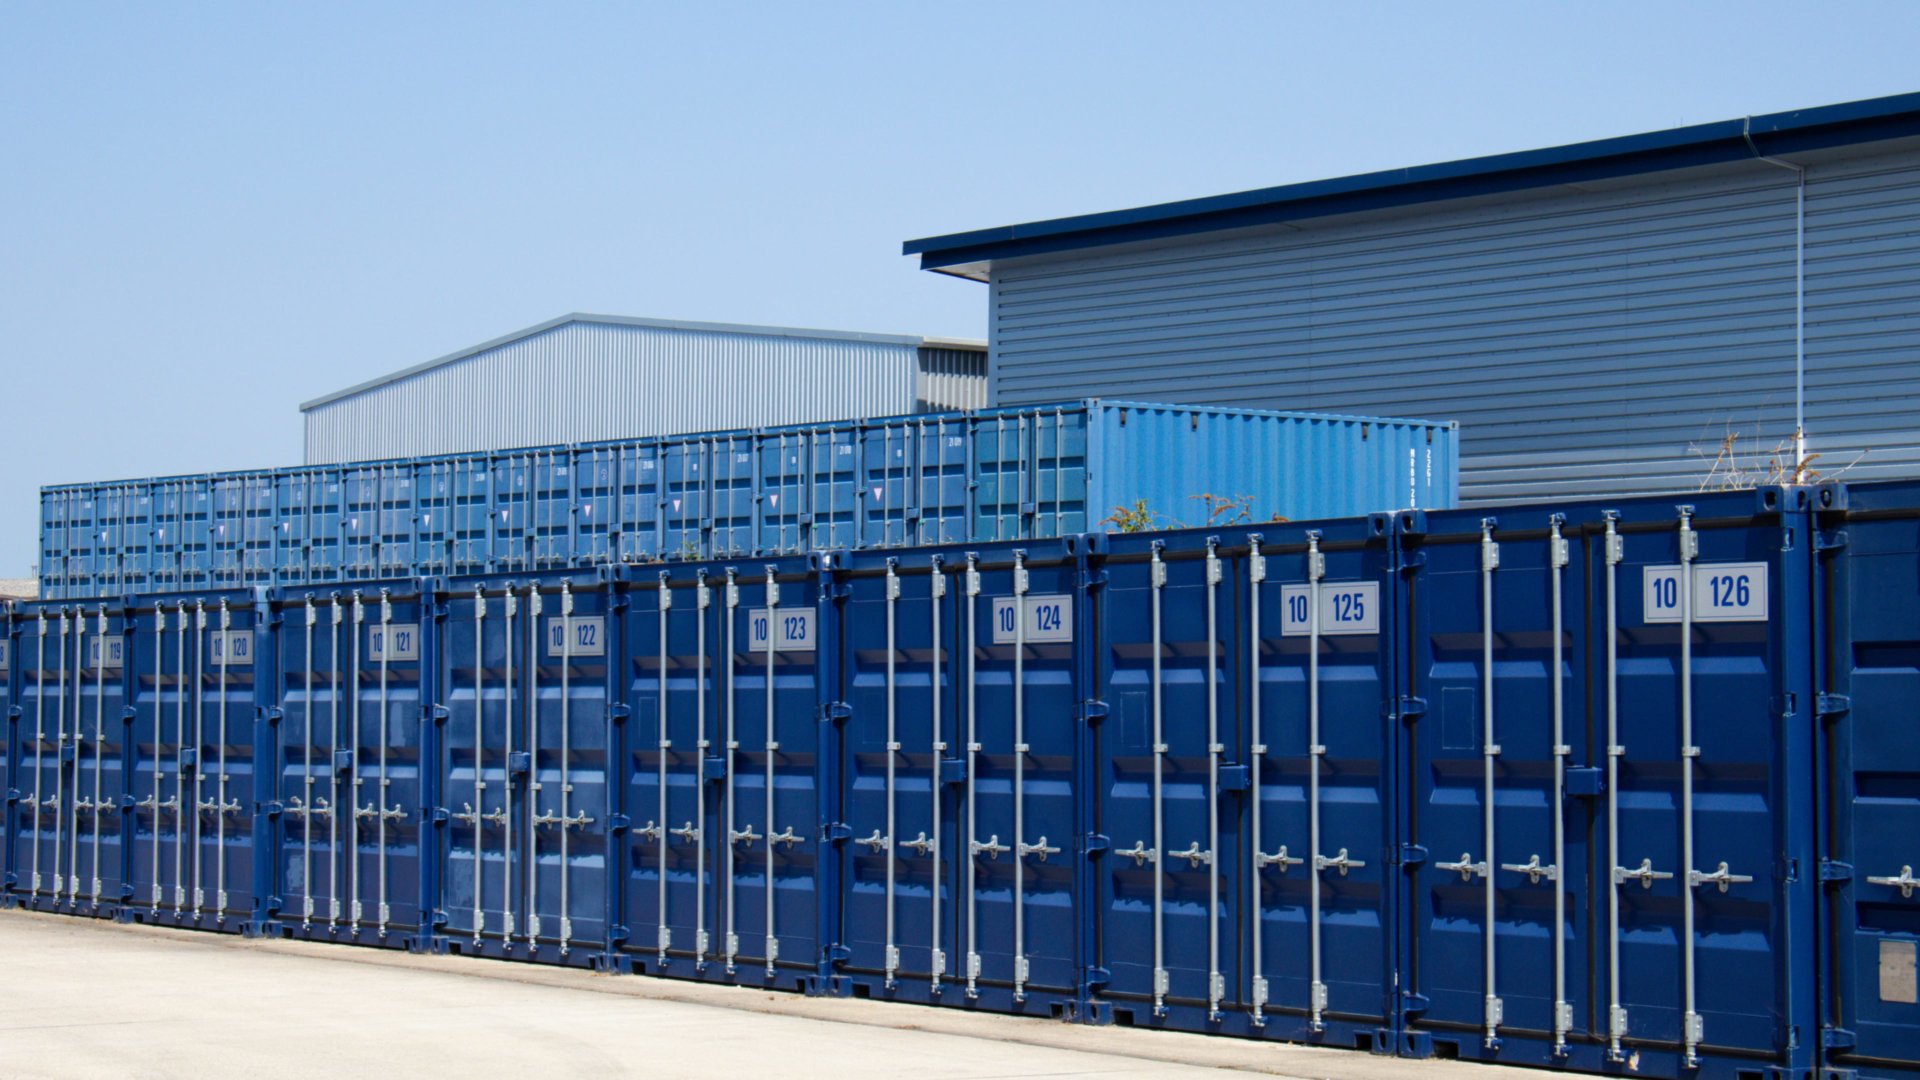 A long row of eight blue self storage containers with metal bars.